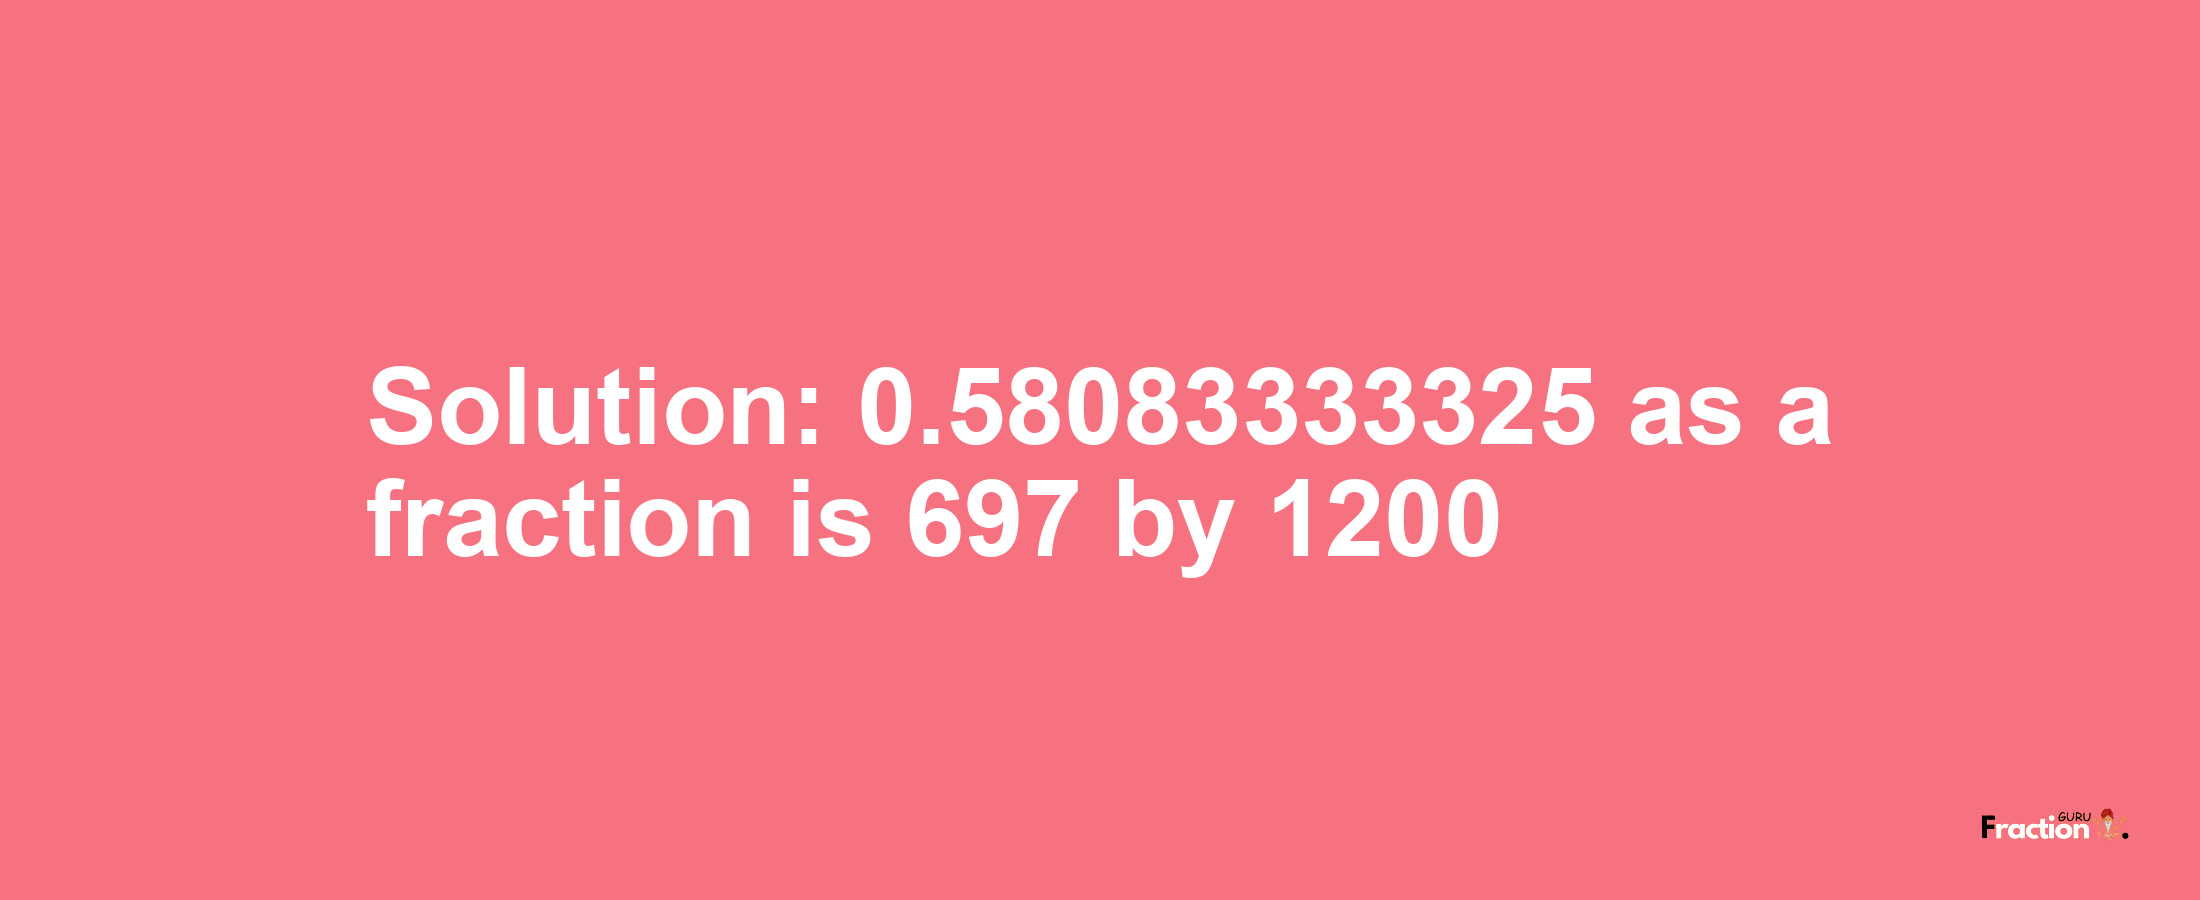 Solution:0.58083333325 as a fraction is 697/1200